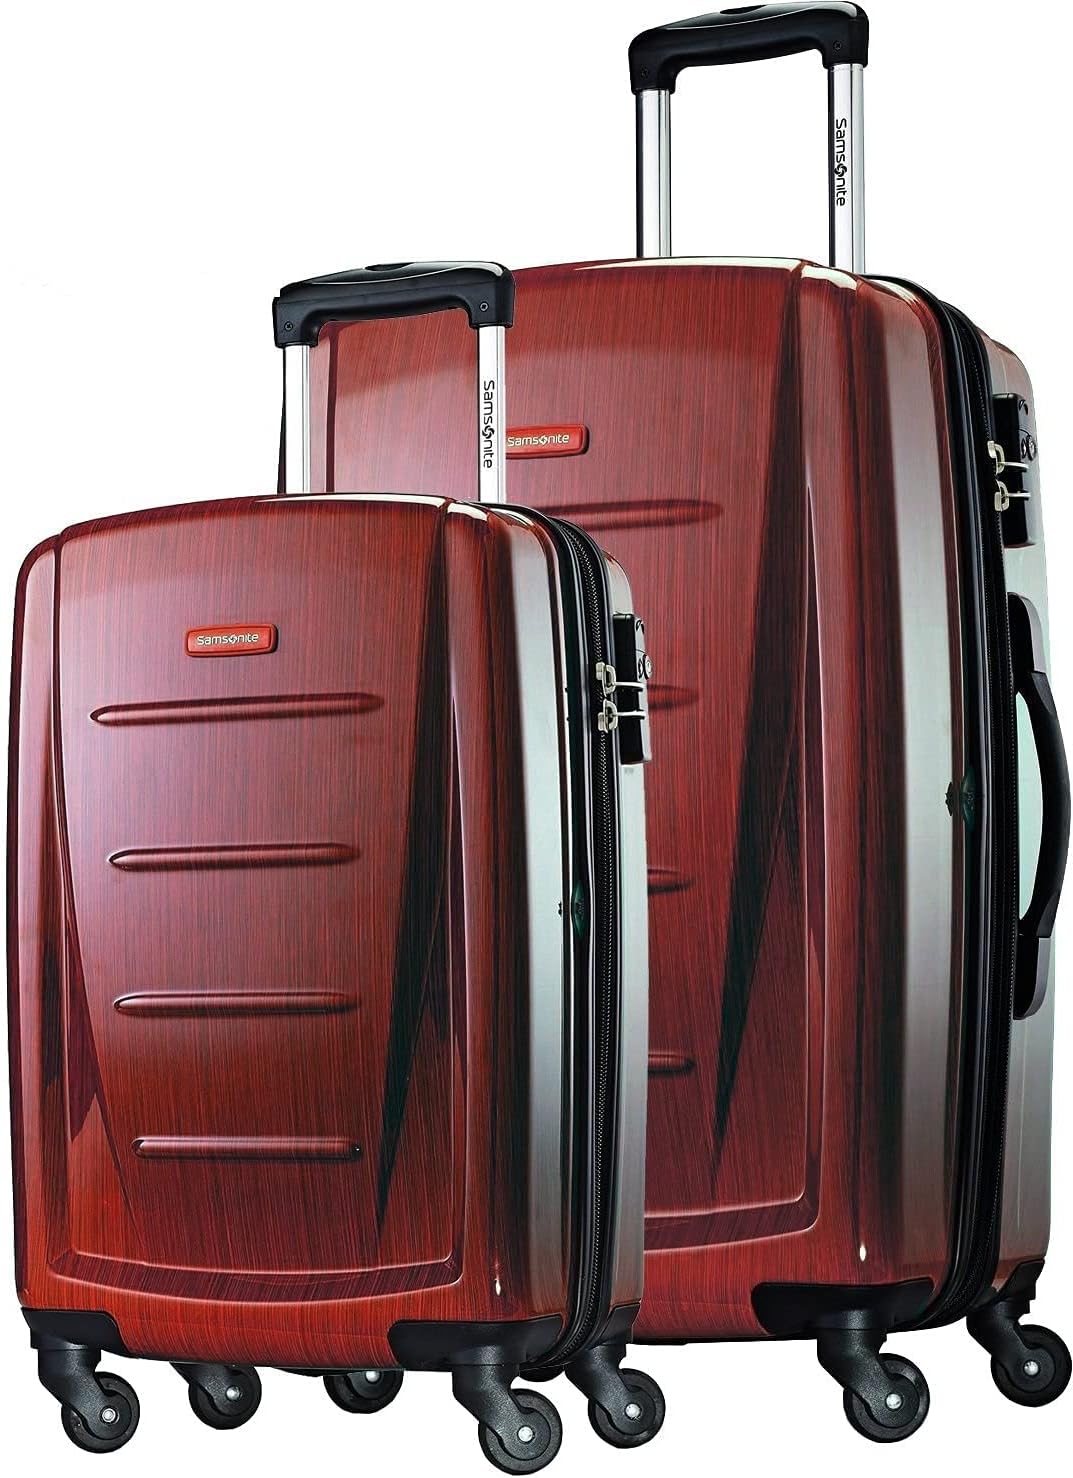 Samsonite Winfield 2 Hardside Expandable Luggage Review